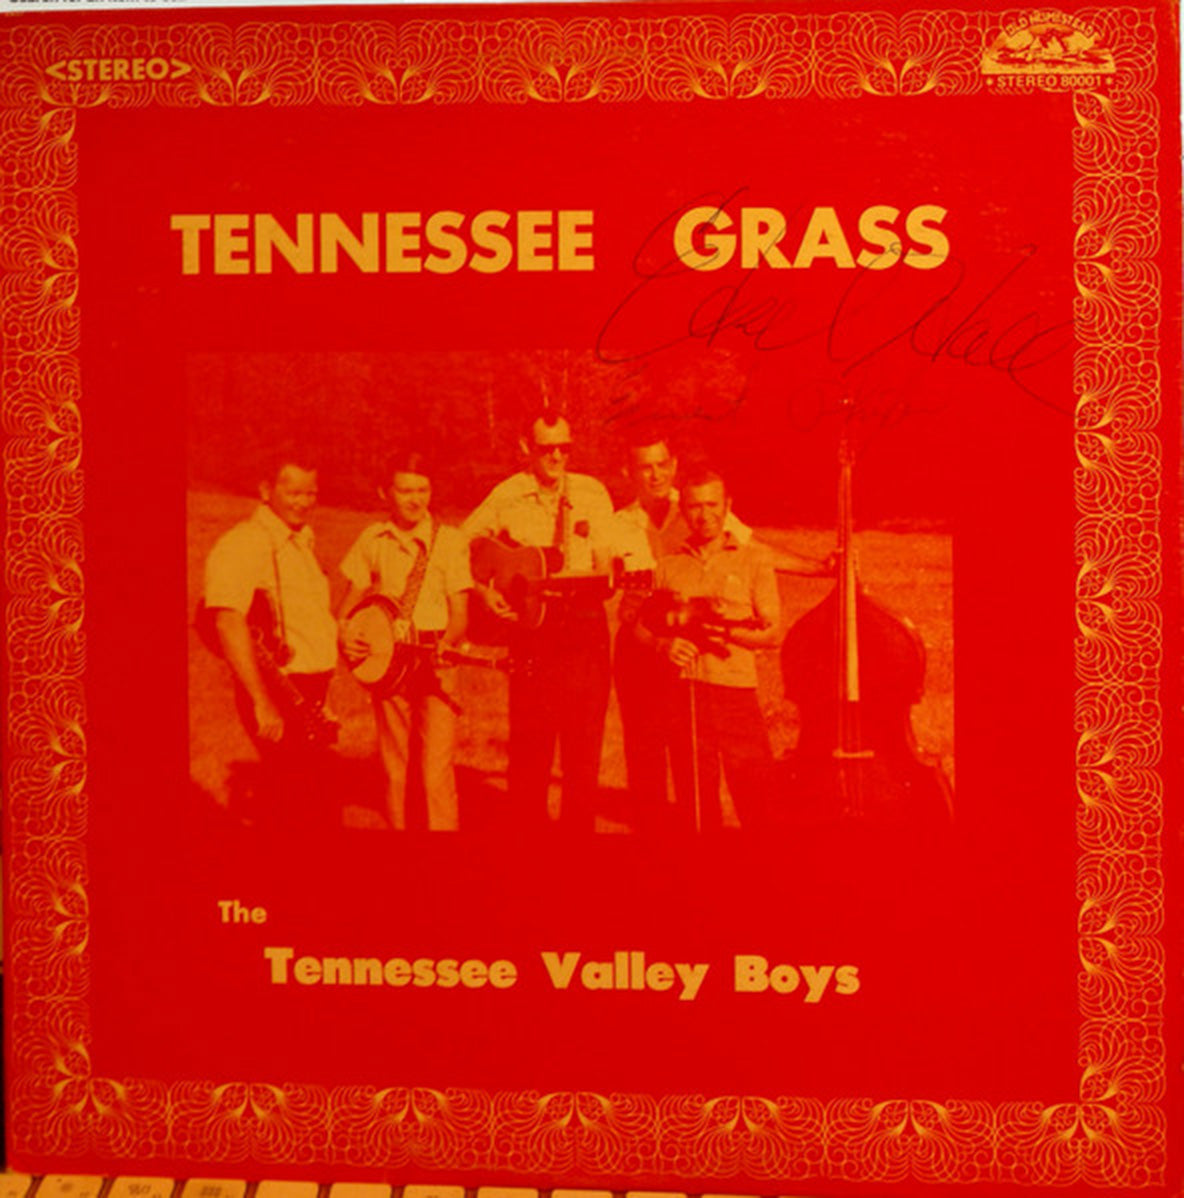 Tennessee Valley Boys – Tennessee Grass - 1973 US Pressing